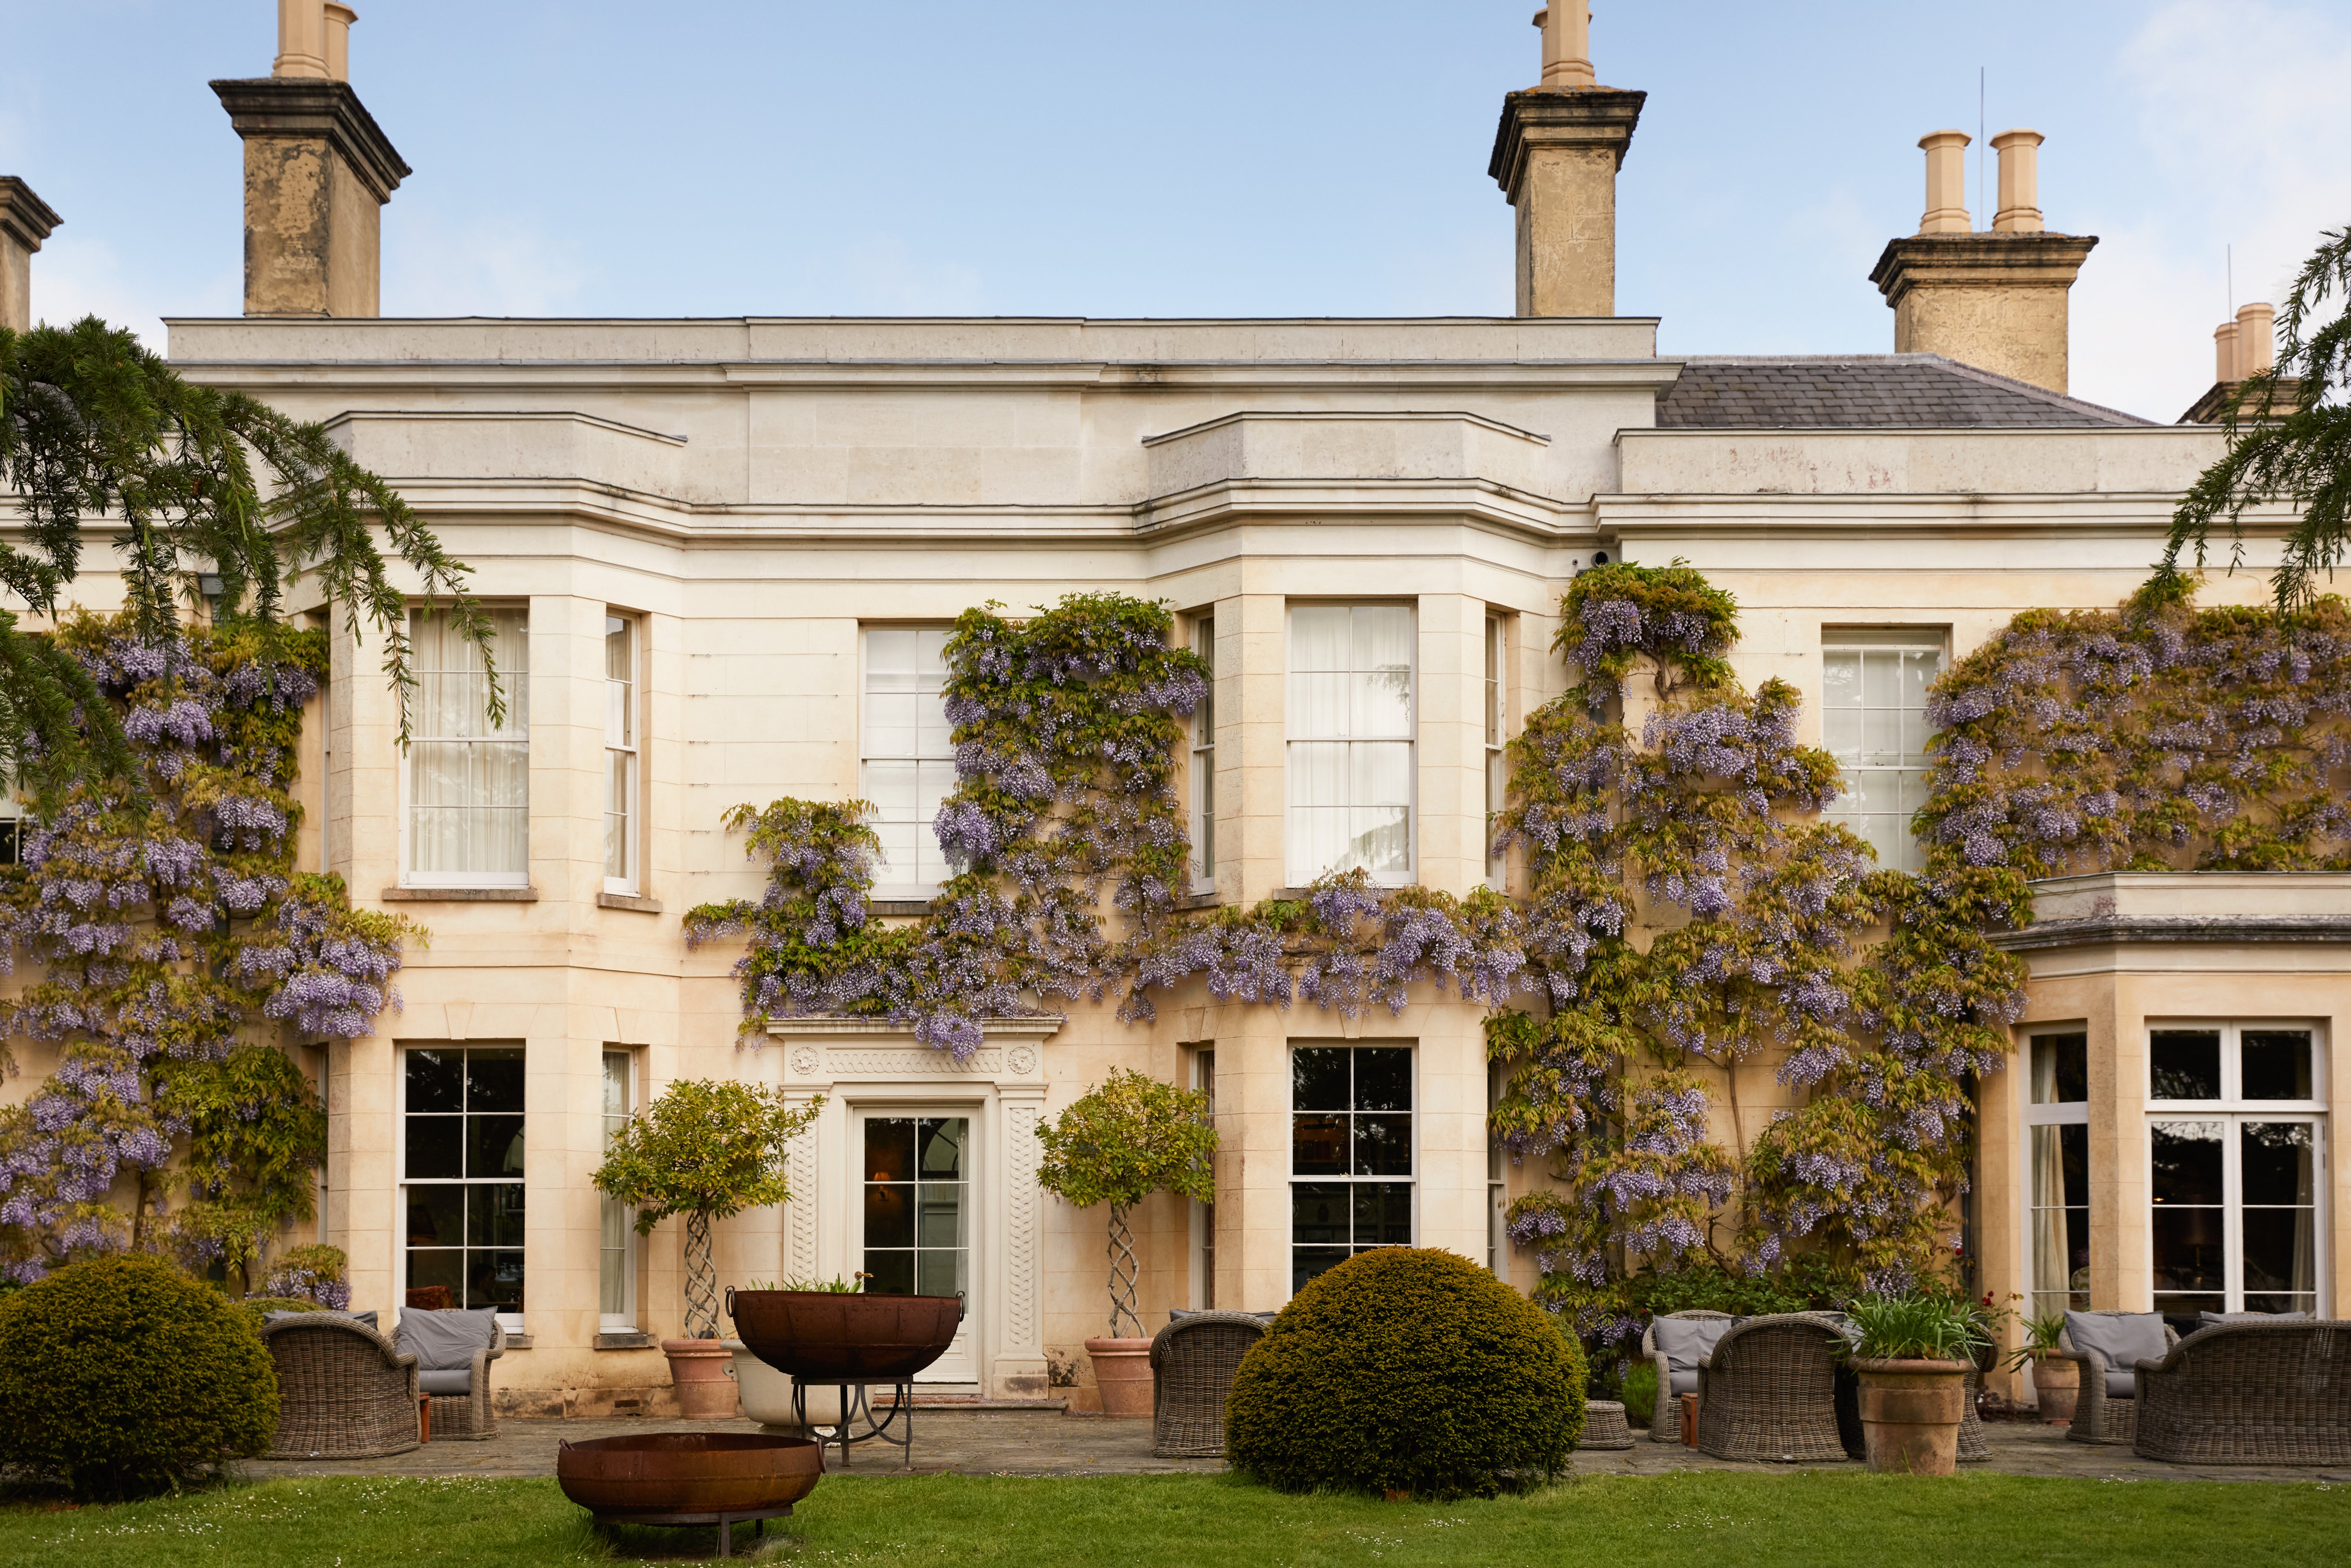 Spoil yourself with a long weekend in one of these UK luxury hotels